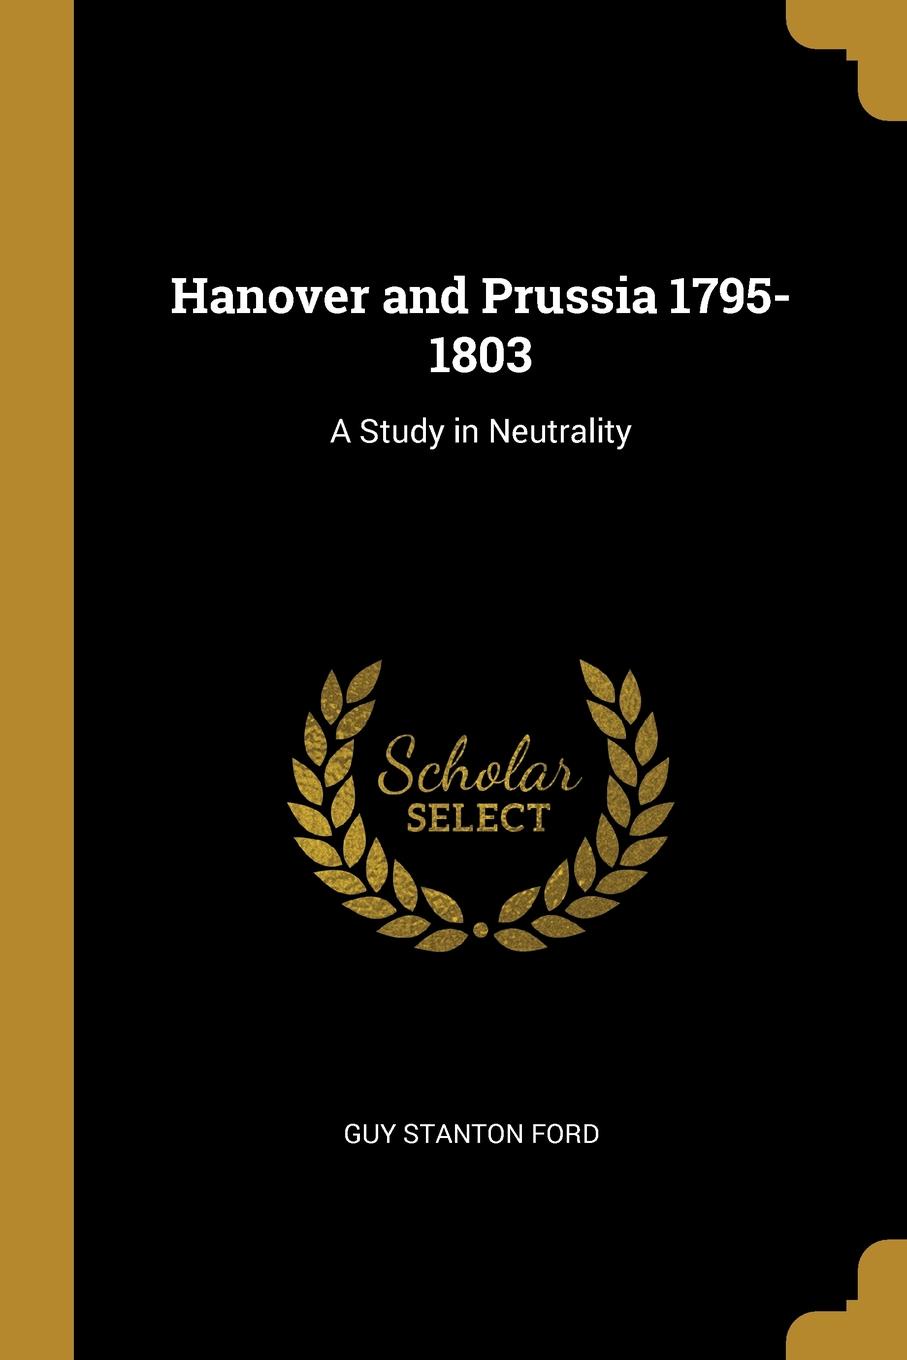 Hanover and Prussia 1795-1803. A Study in Neutrality